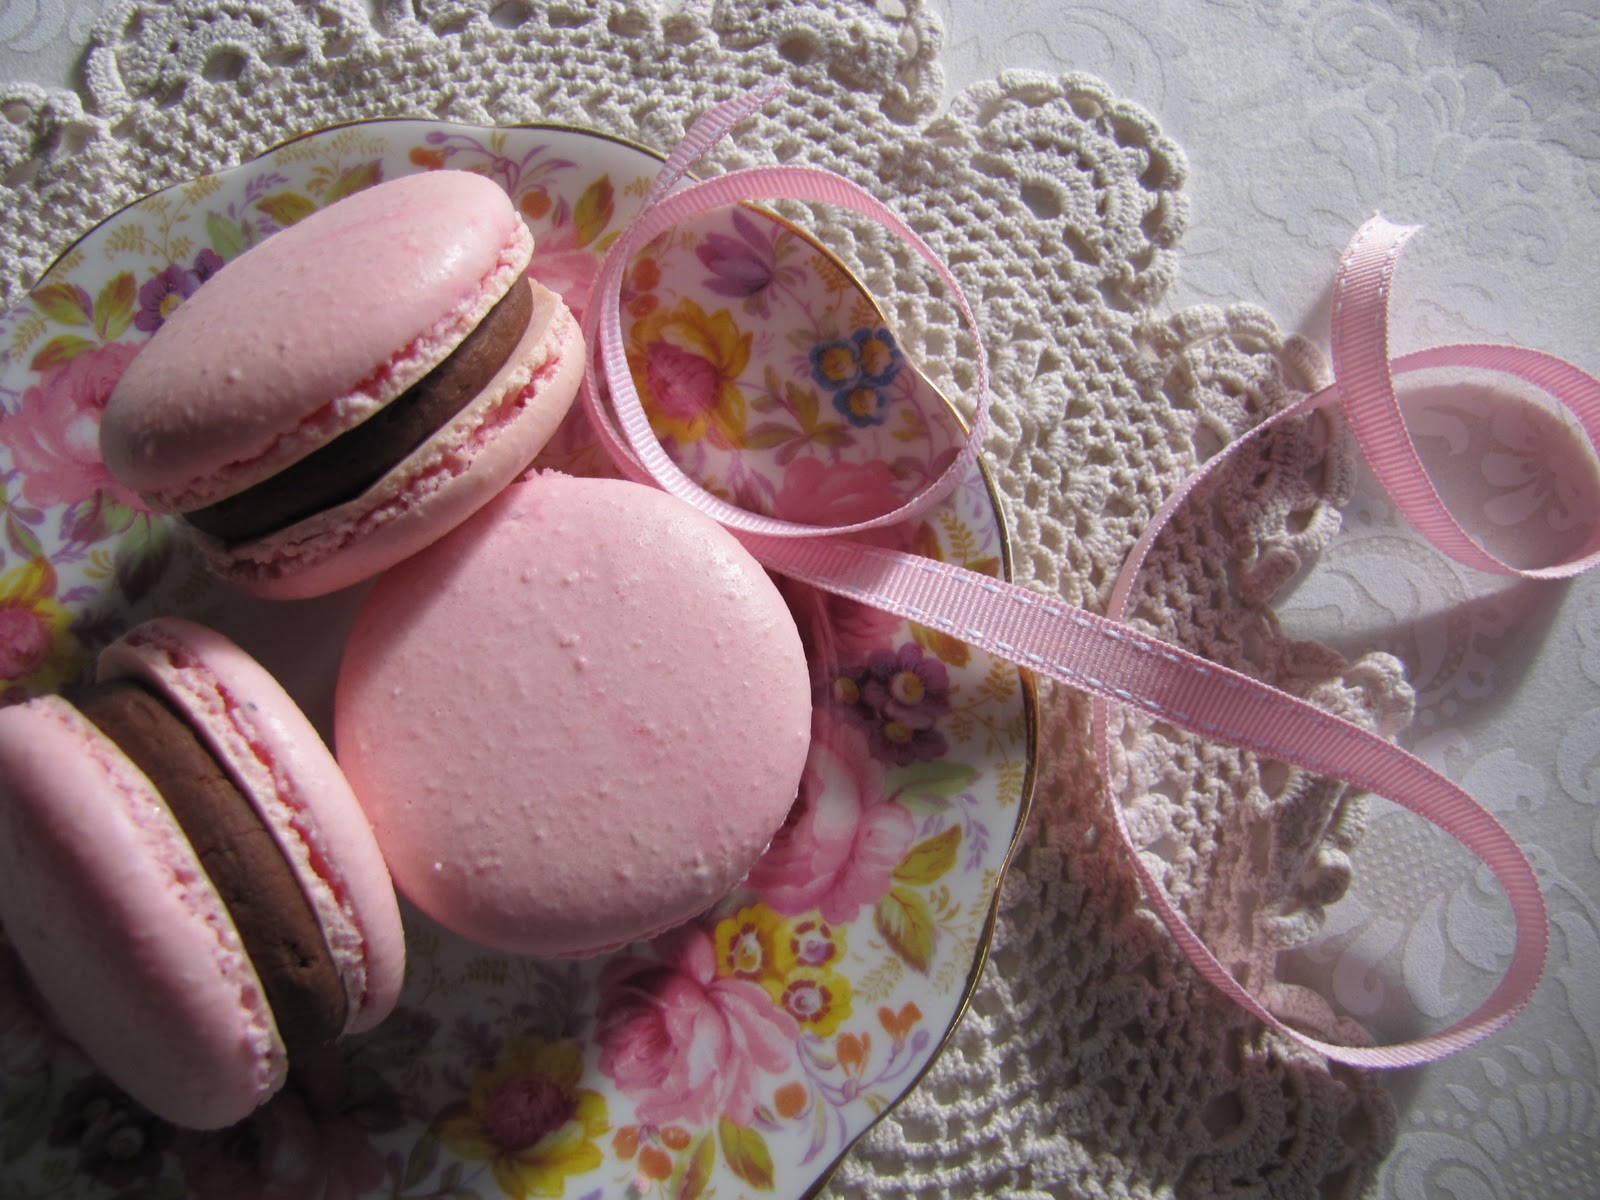 my button cake: turkish delight macarons